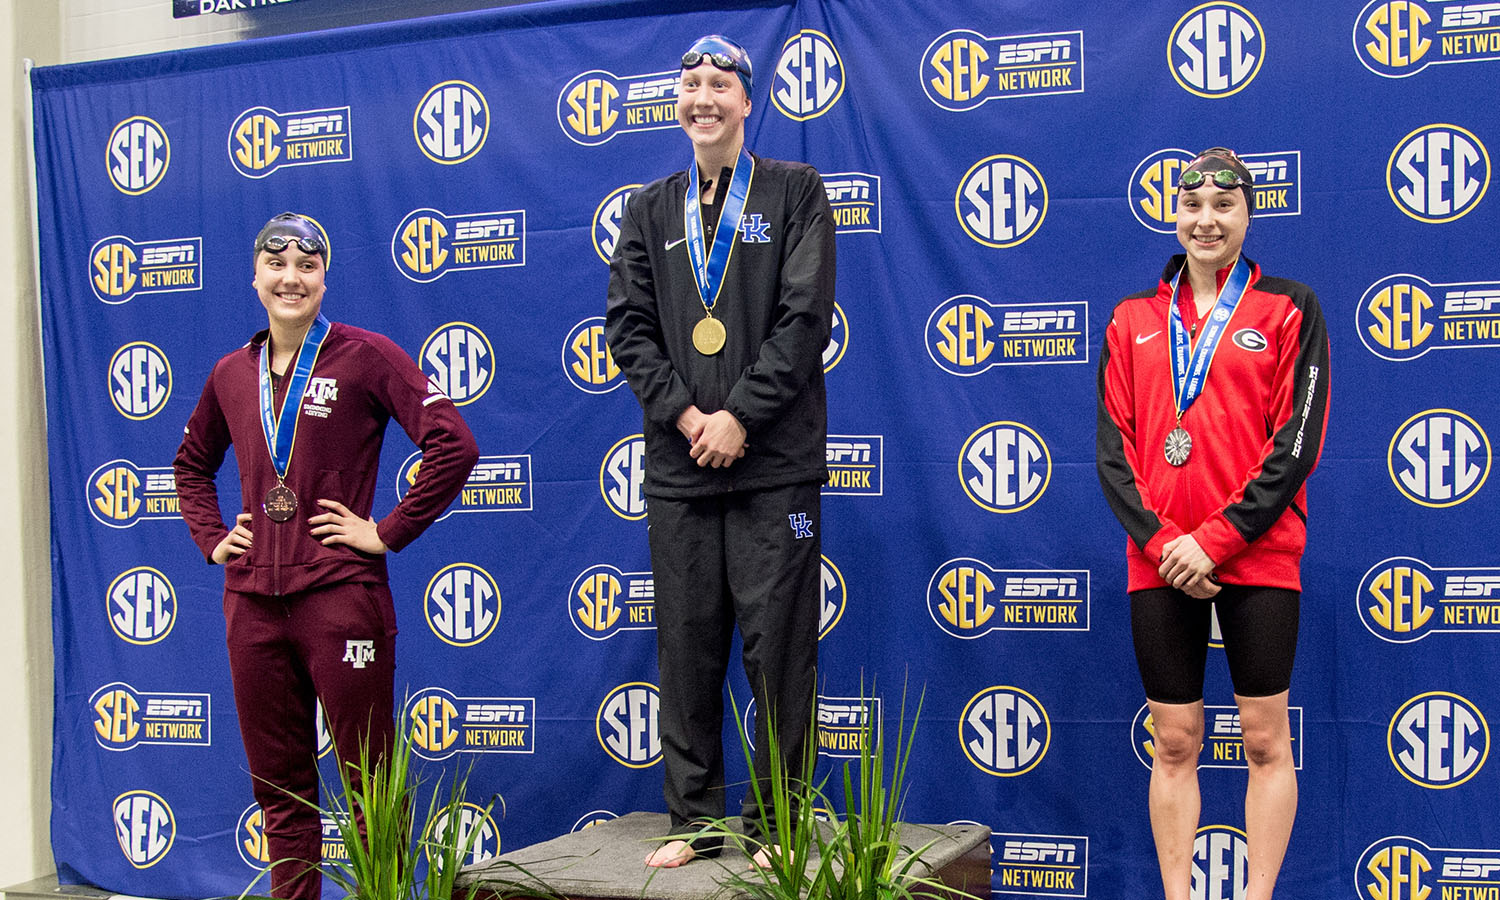 Freriks Wins Gold, Seidt Takes Silver on Day Two of SEC Championships